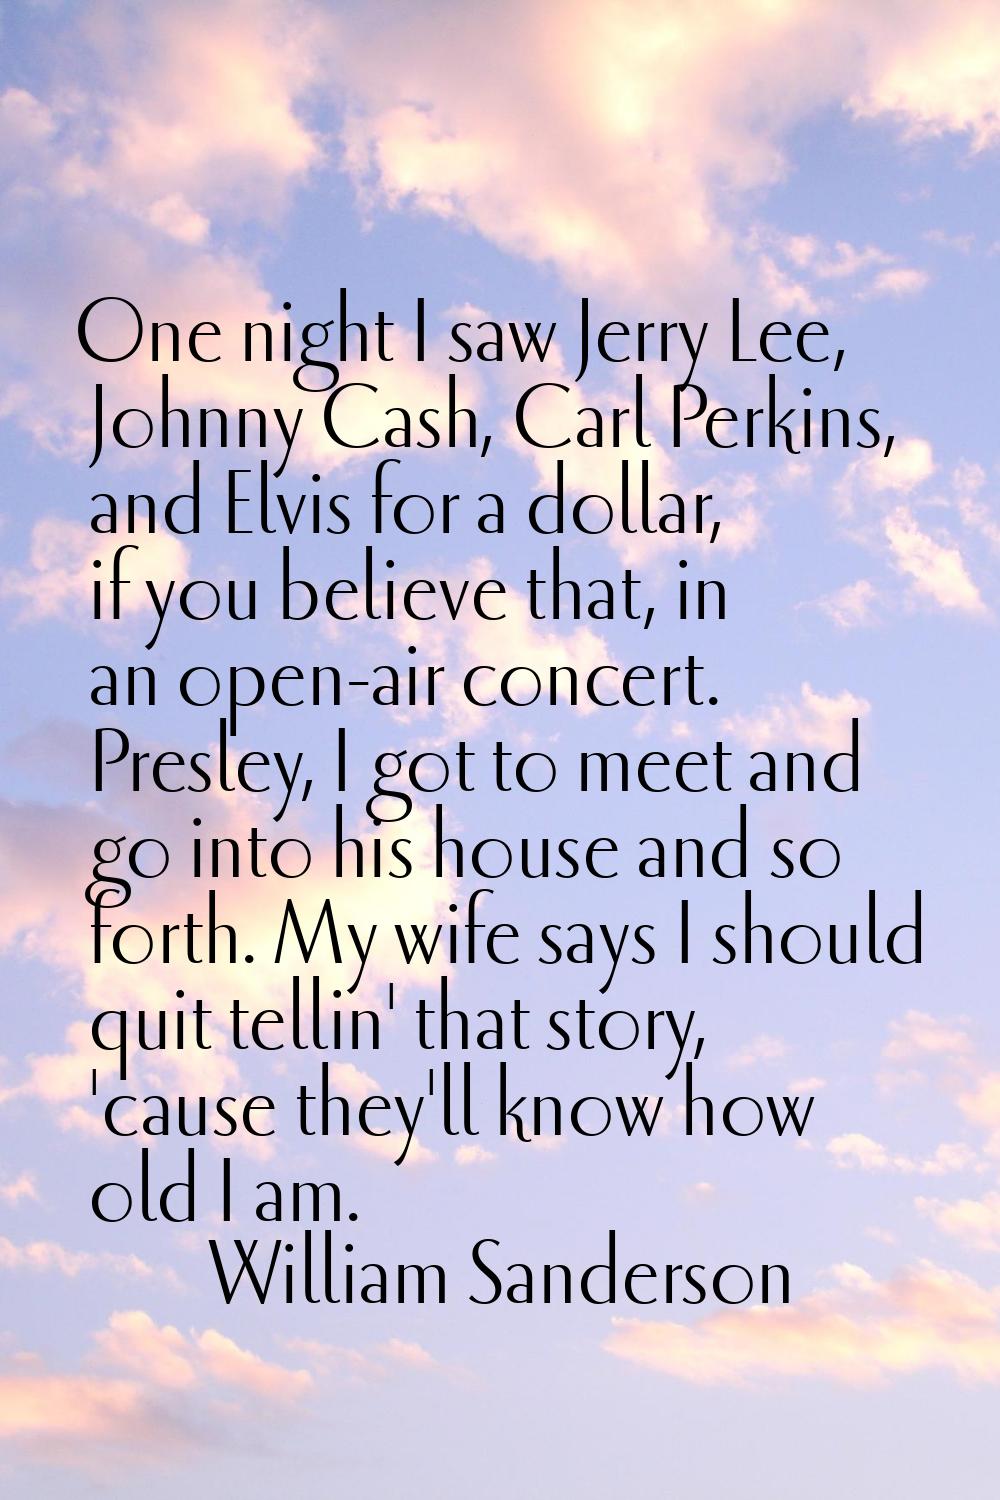 One night I saw Jerry Lee, Johnny Cash, Carl Perkins, and Elvis for a dollar, if you believe that, 